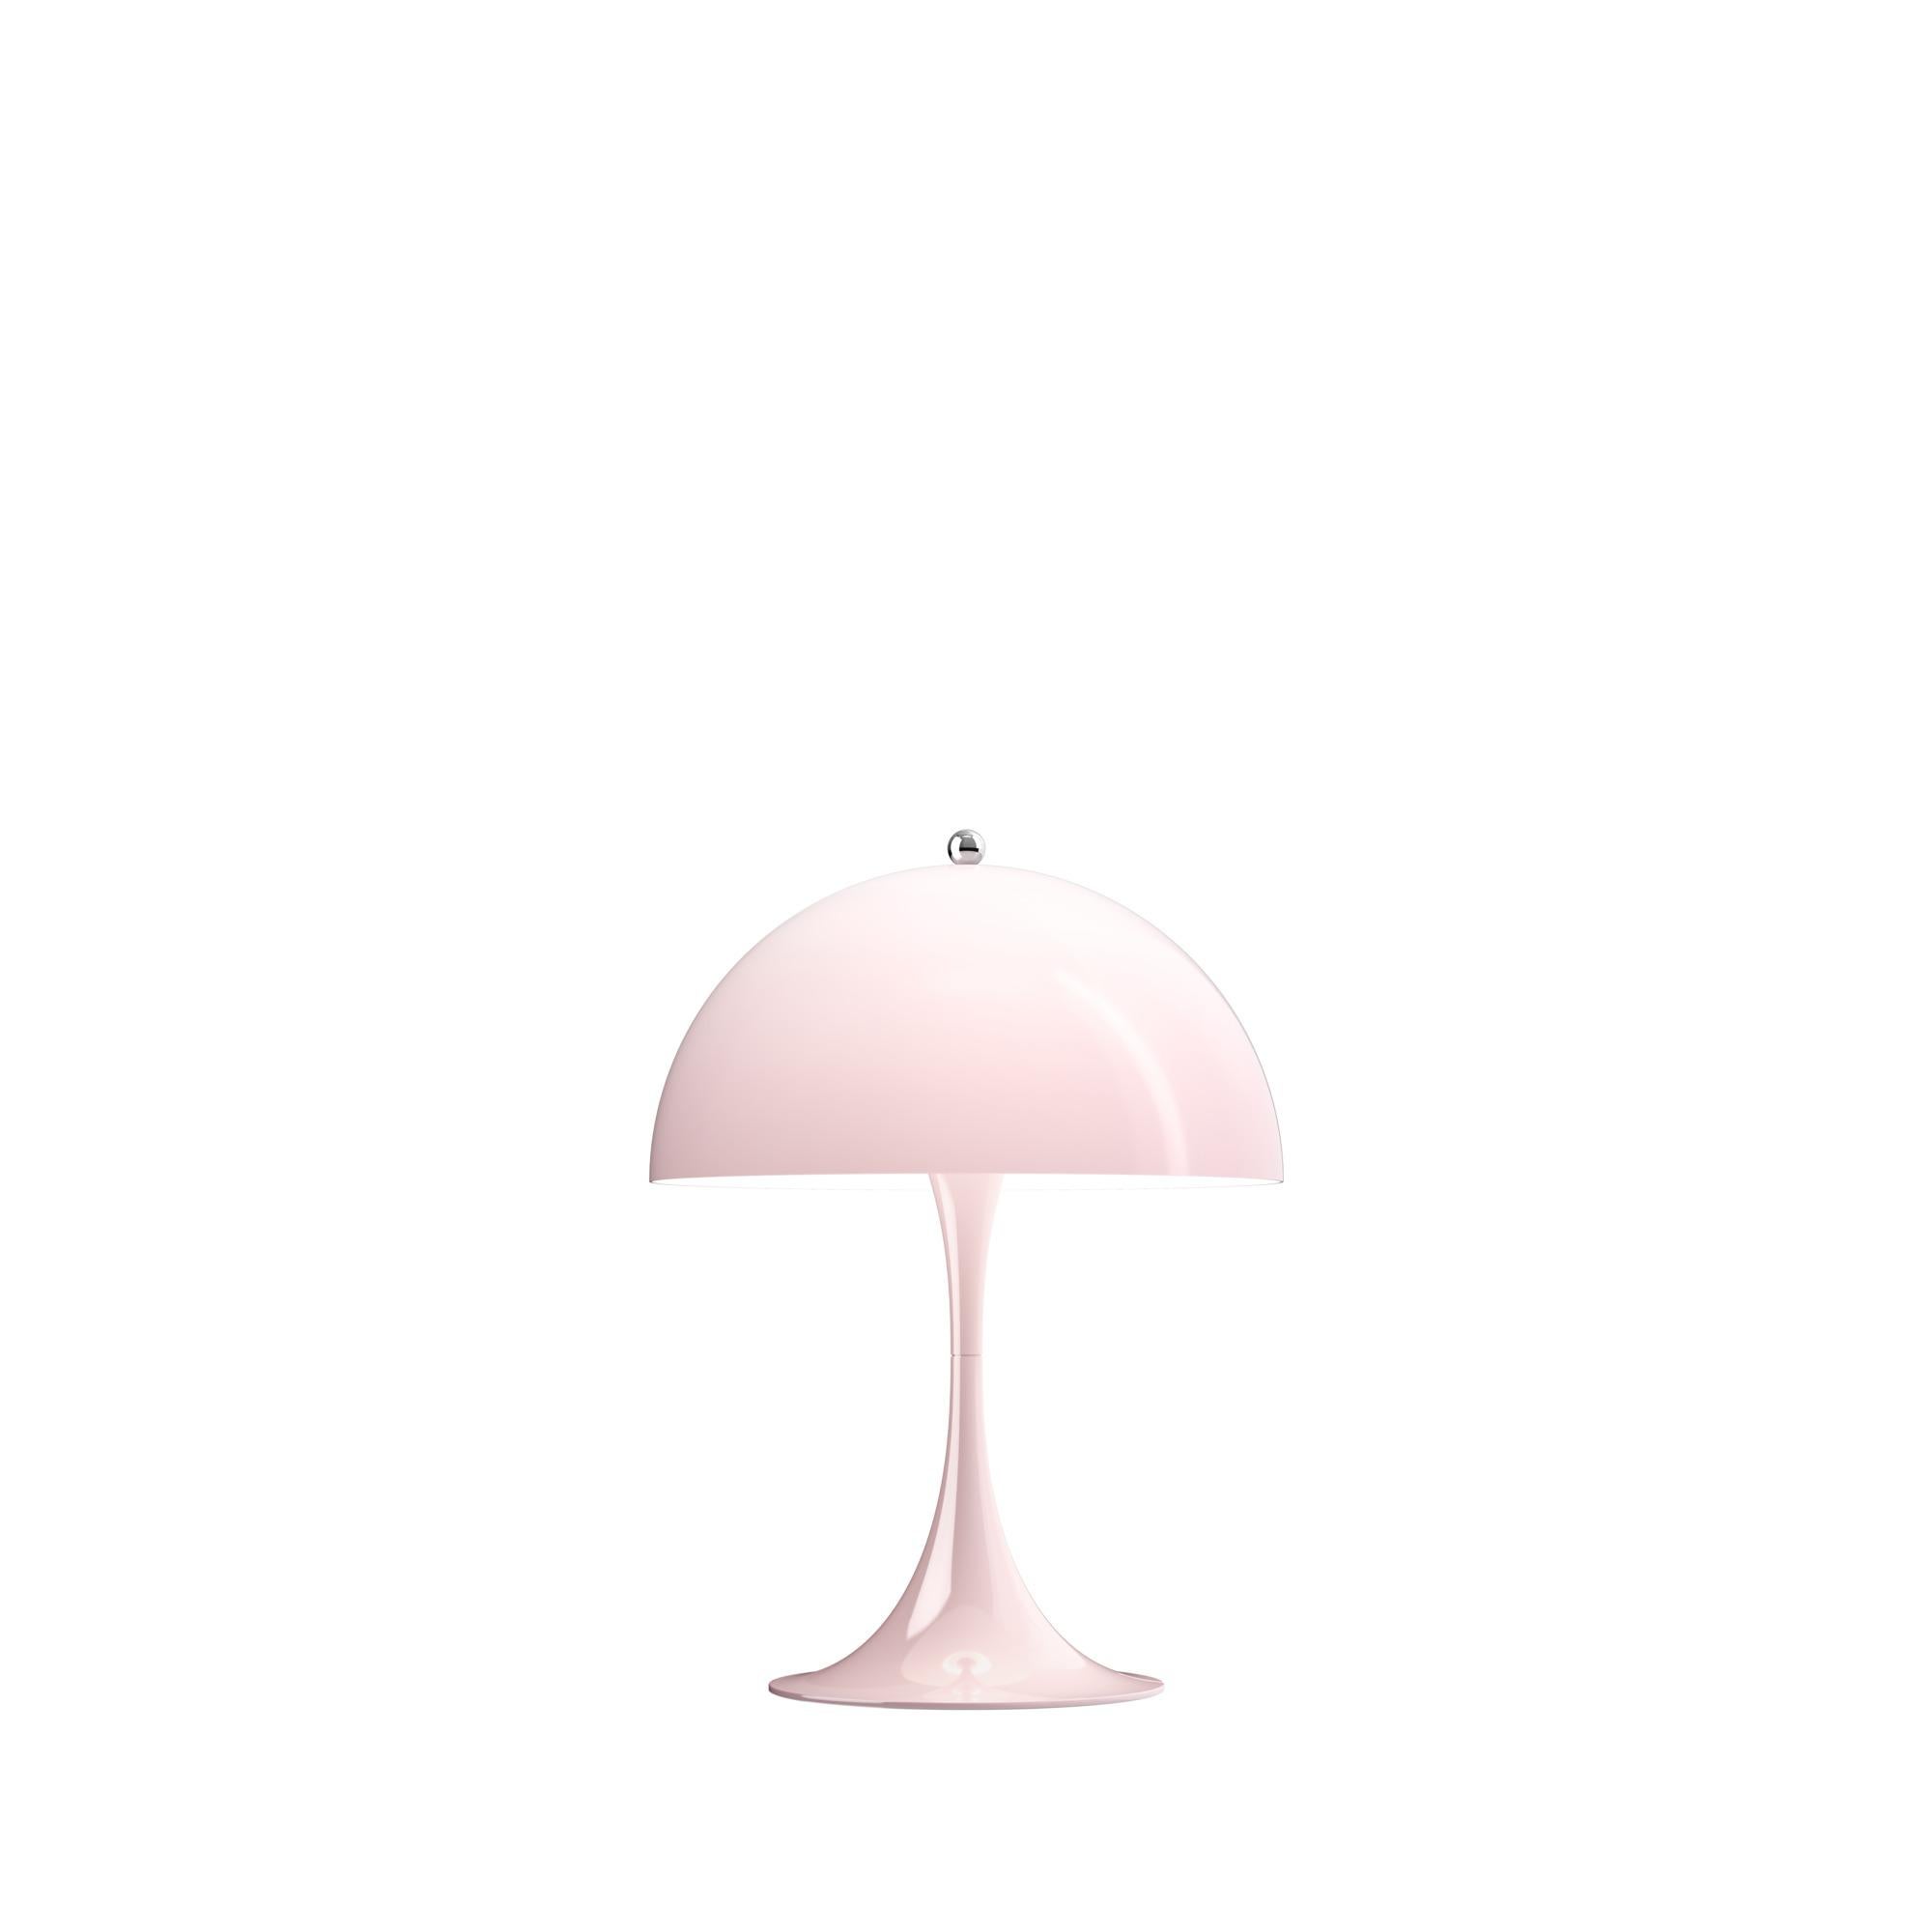 Verner Panton 'Panthella 250' Table Lamp for Louis Poulsen in Opal Pale Rose In New Condition For Sale In Glendale, CA